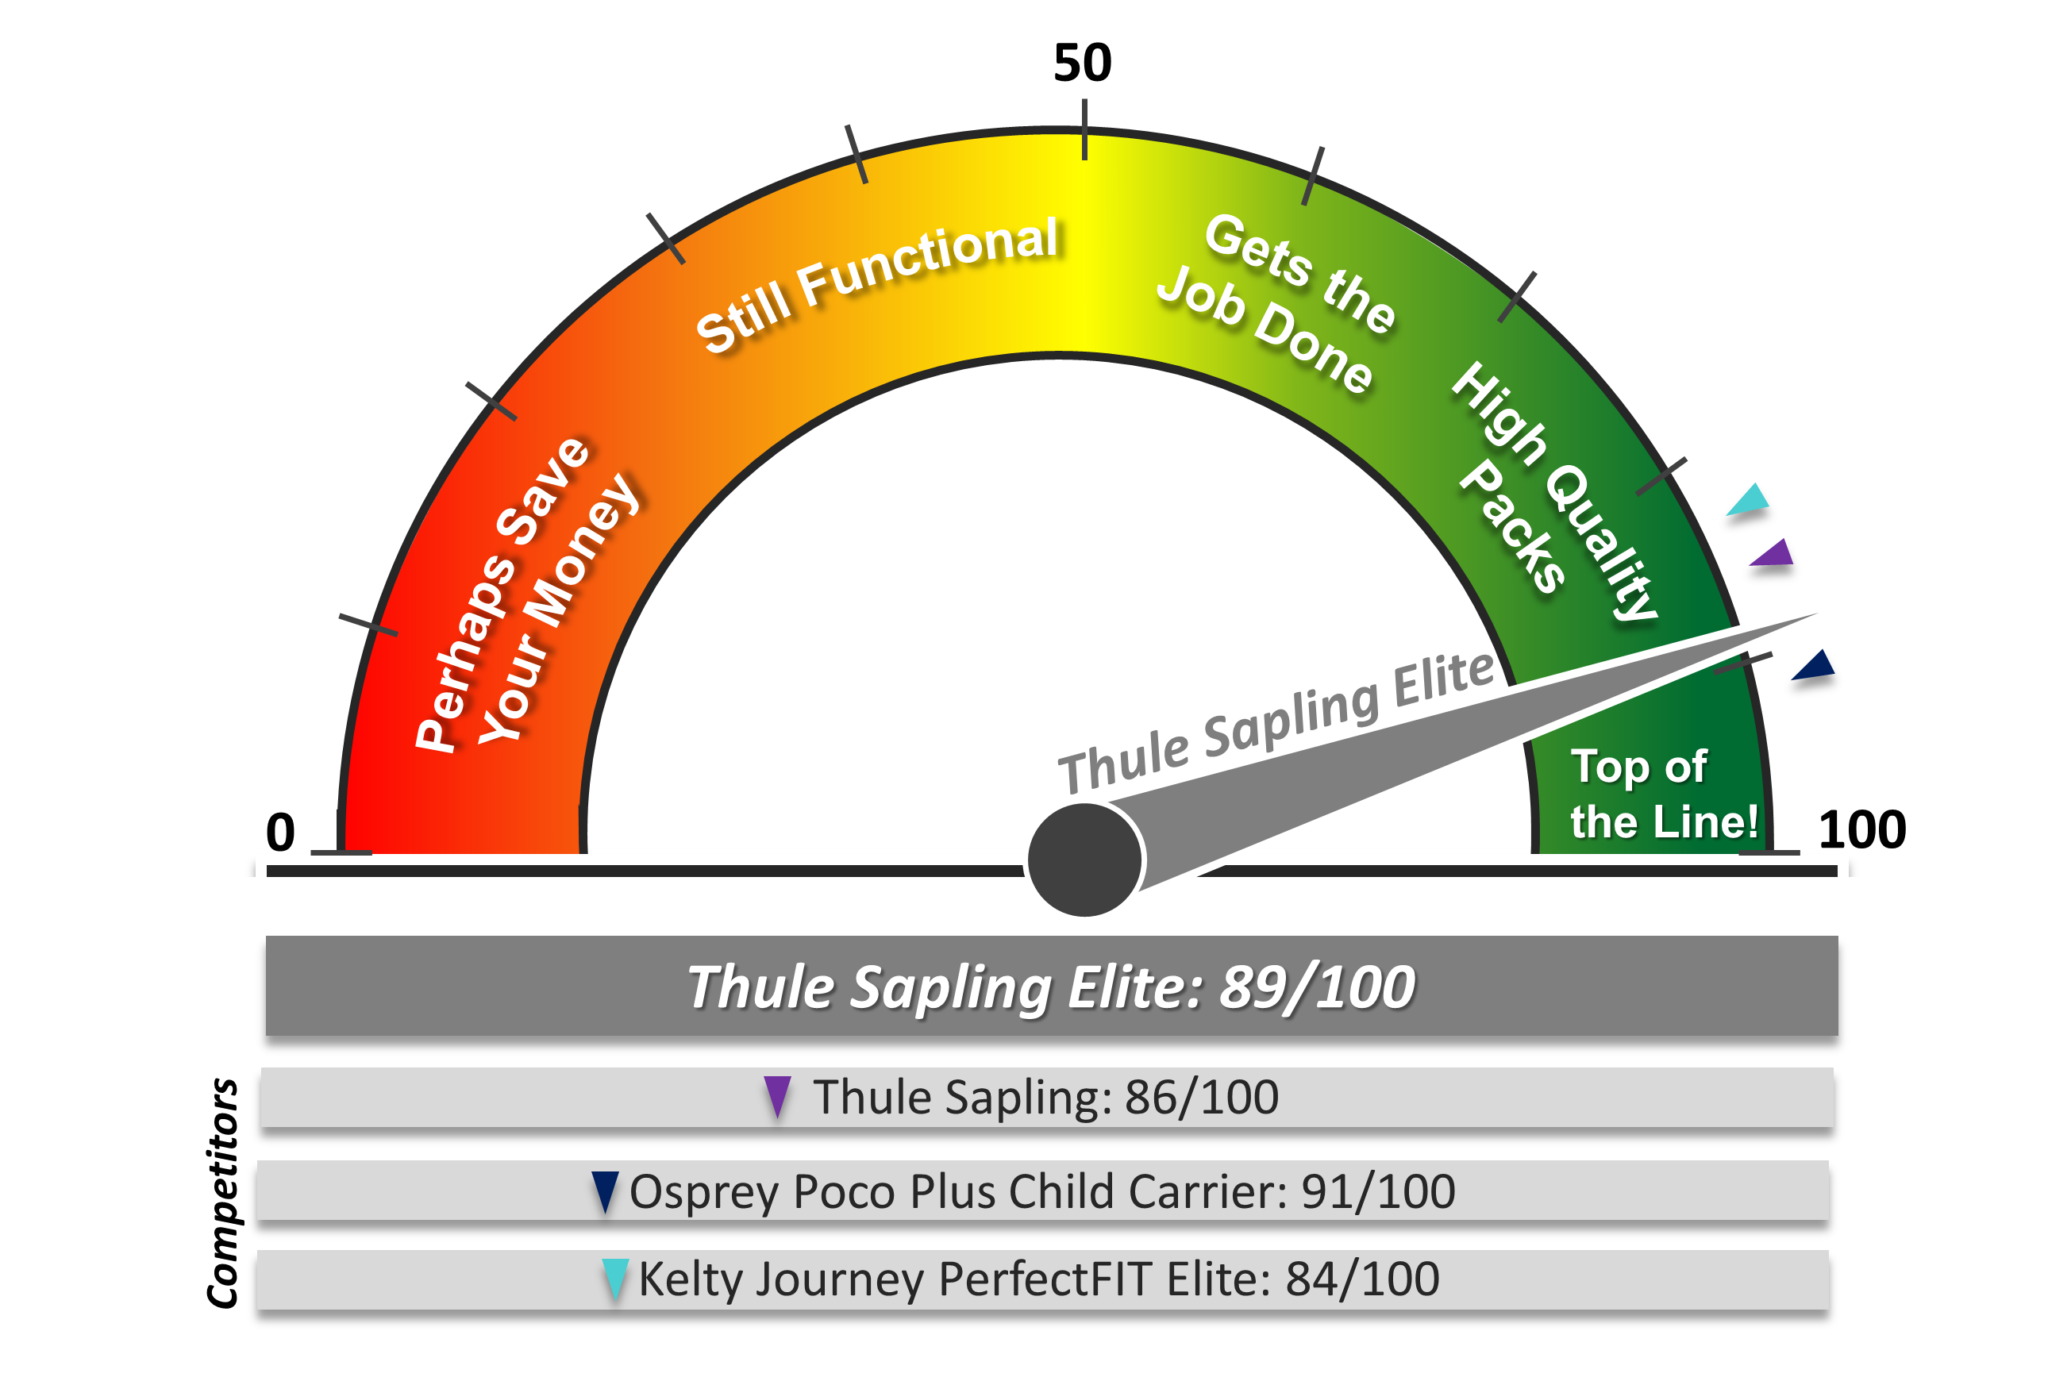 dial chart showing overall rating of thule sapling elite